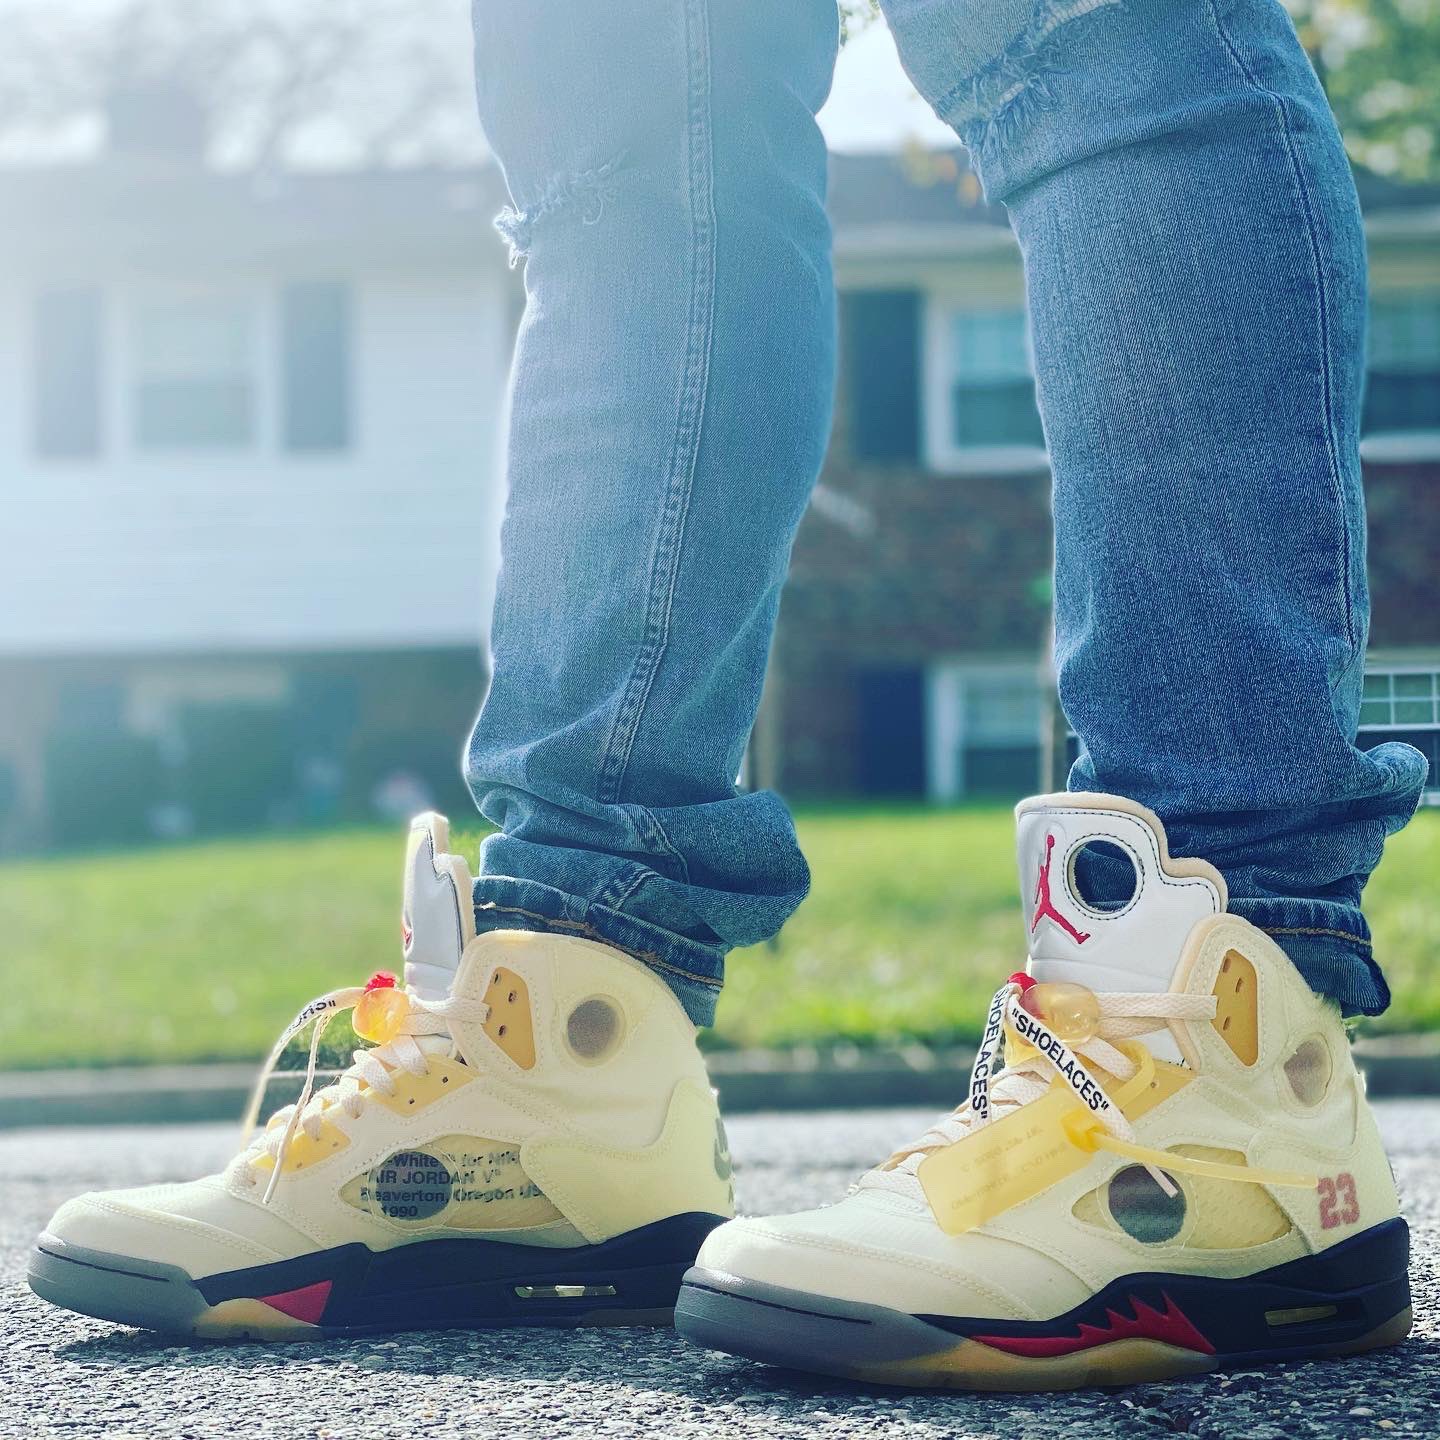 jordan 5 off white outfit